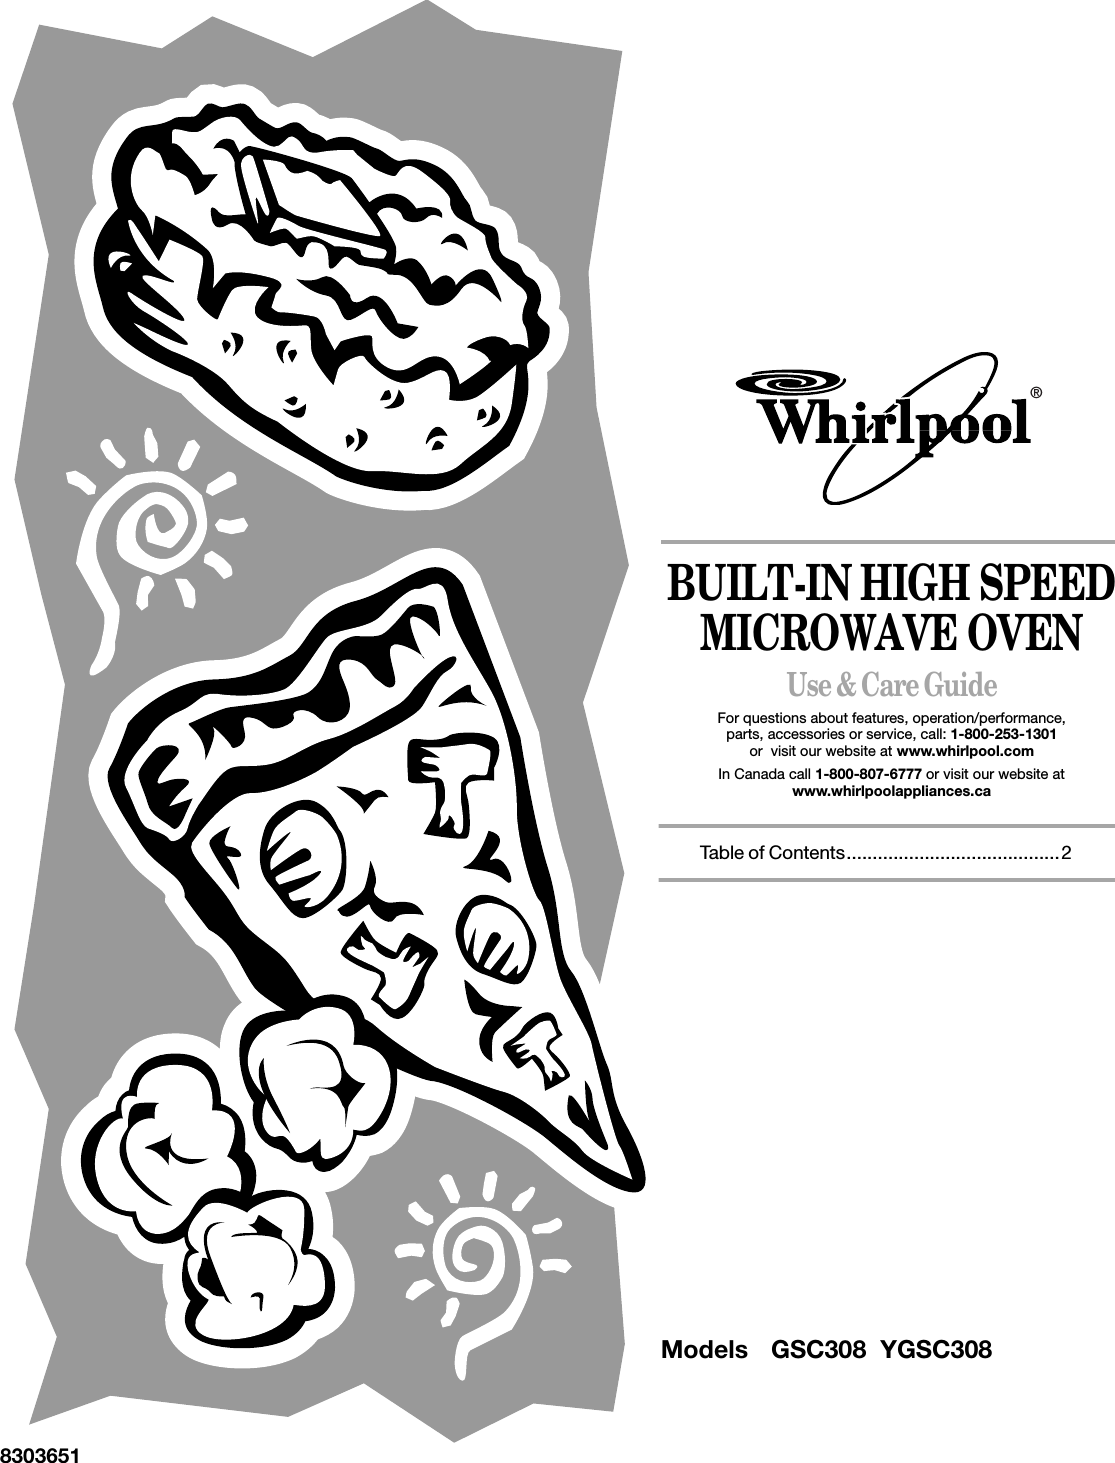 BUILT-IN HIGH SPEED MICROWAVE OVENUse &amp; Care GuideFor questions about features, operation/performance,parts, accessories or service, call: 1-800-253-1301or  visit our website at www.whirlpool.com In Canada call 1-800-807-6777 or visit our website at www.whirlpoolappliances.ca    Table of Contents.........................................28303651®Models GSC308  YGSC308